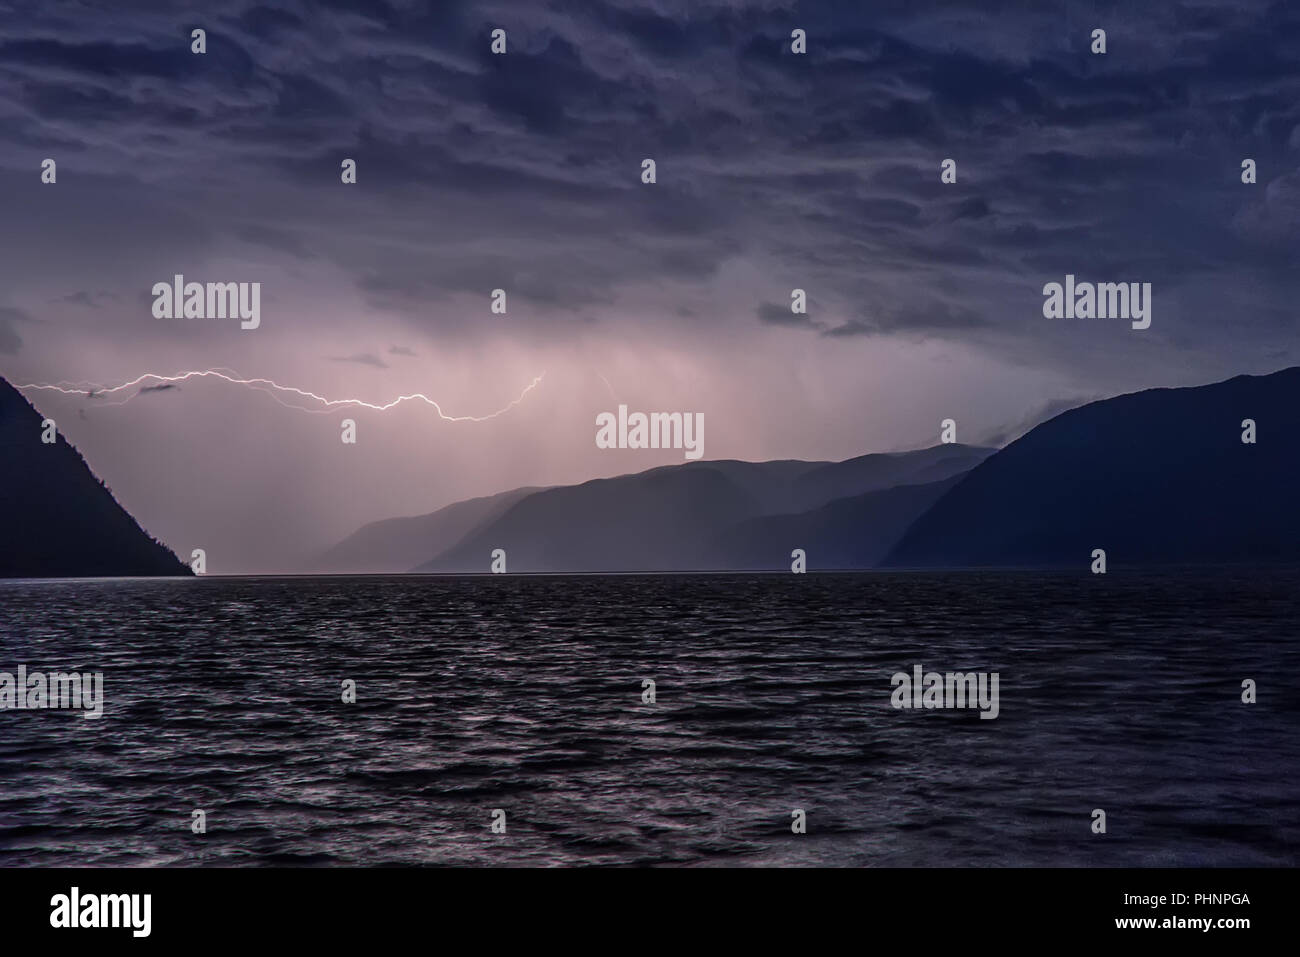 Amazing view with a flash of lightning in dark blue clouds during a thunderstorm over a lake in the mountains Stock Photo